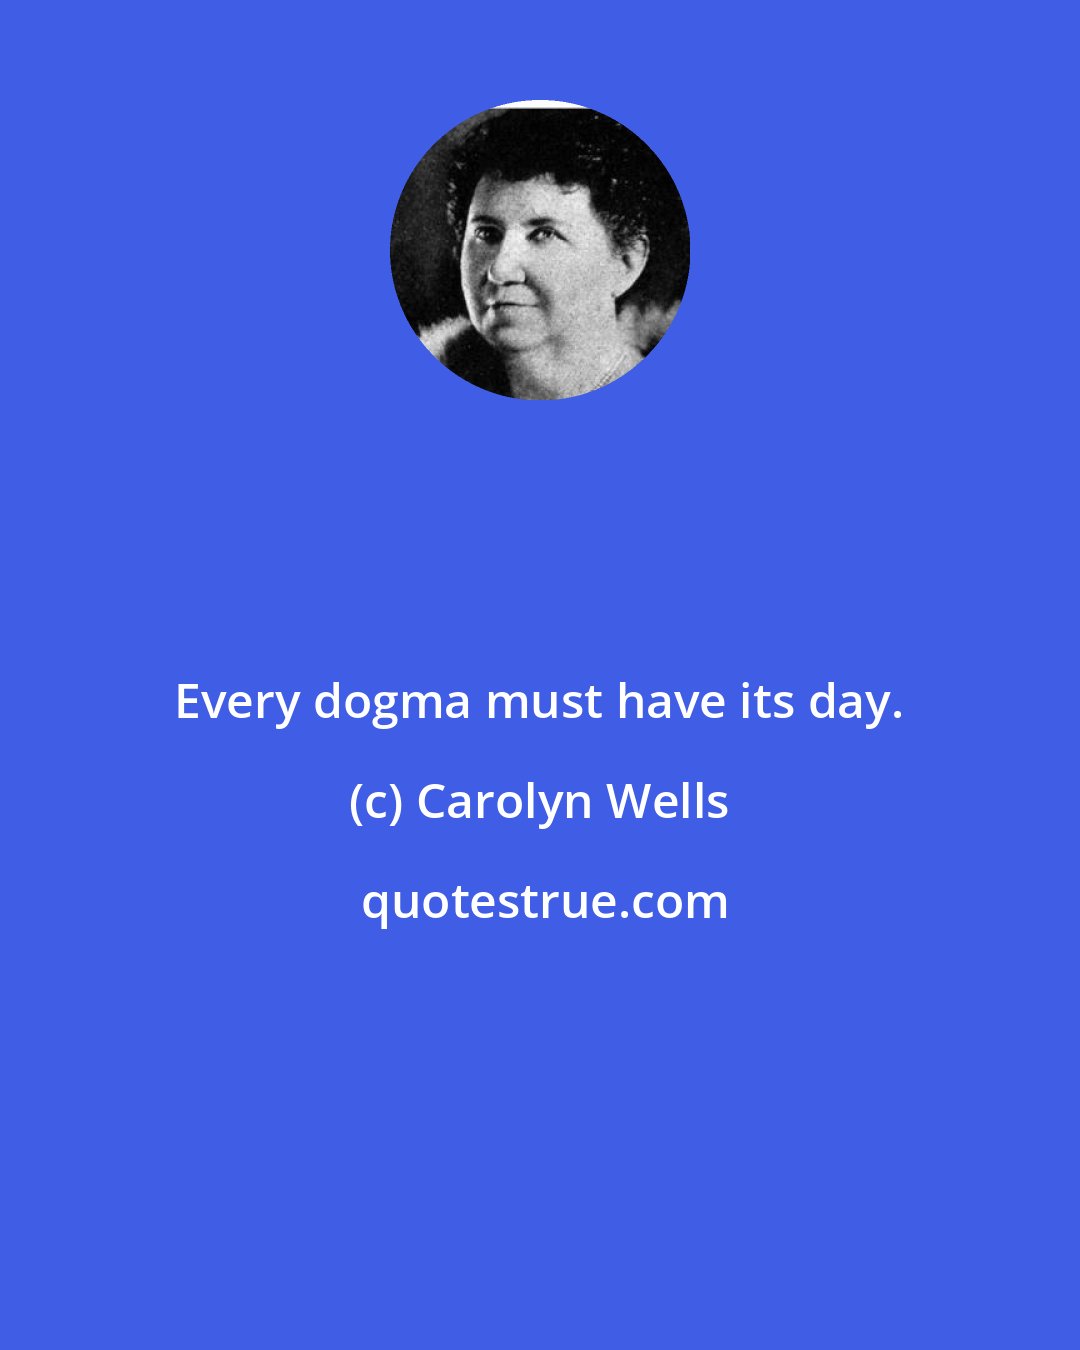 Carolyn Wells: Every dogma must have its day.